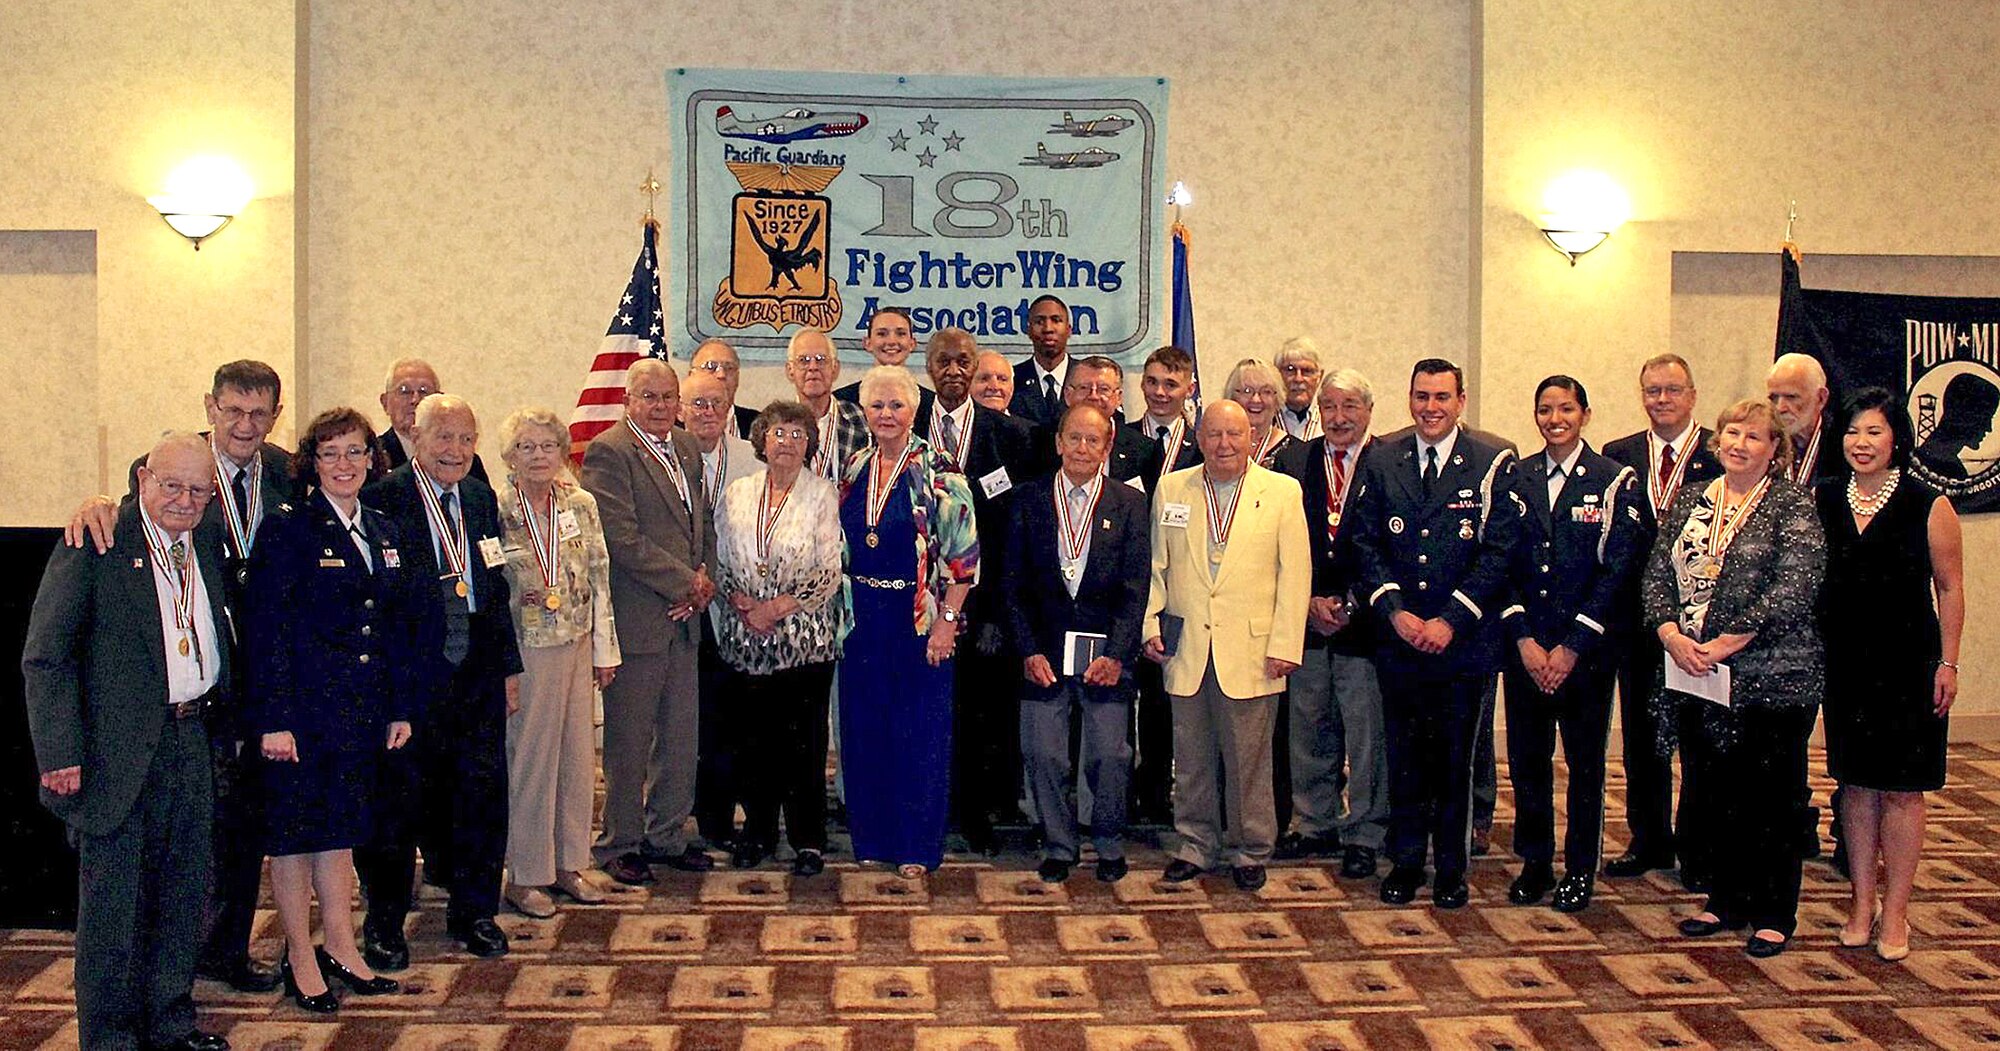 Members from the18th Fighter Bomb Wing Association pose for a photo during their annual reunion dinner Oct. 24, at the Double Tree Hotel San Antonio, Texas. Twenty-five Korean War veterans were honored with the Republic of Korea Ambassador for Peace Medal, a commemorative medal produced by the Korean Government as an expression of gratitude and honor to America's Korean War veterans. (Photo by Susan Kee) (released)